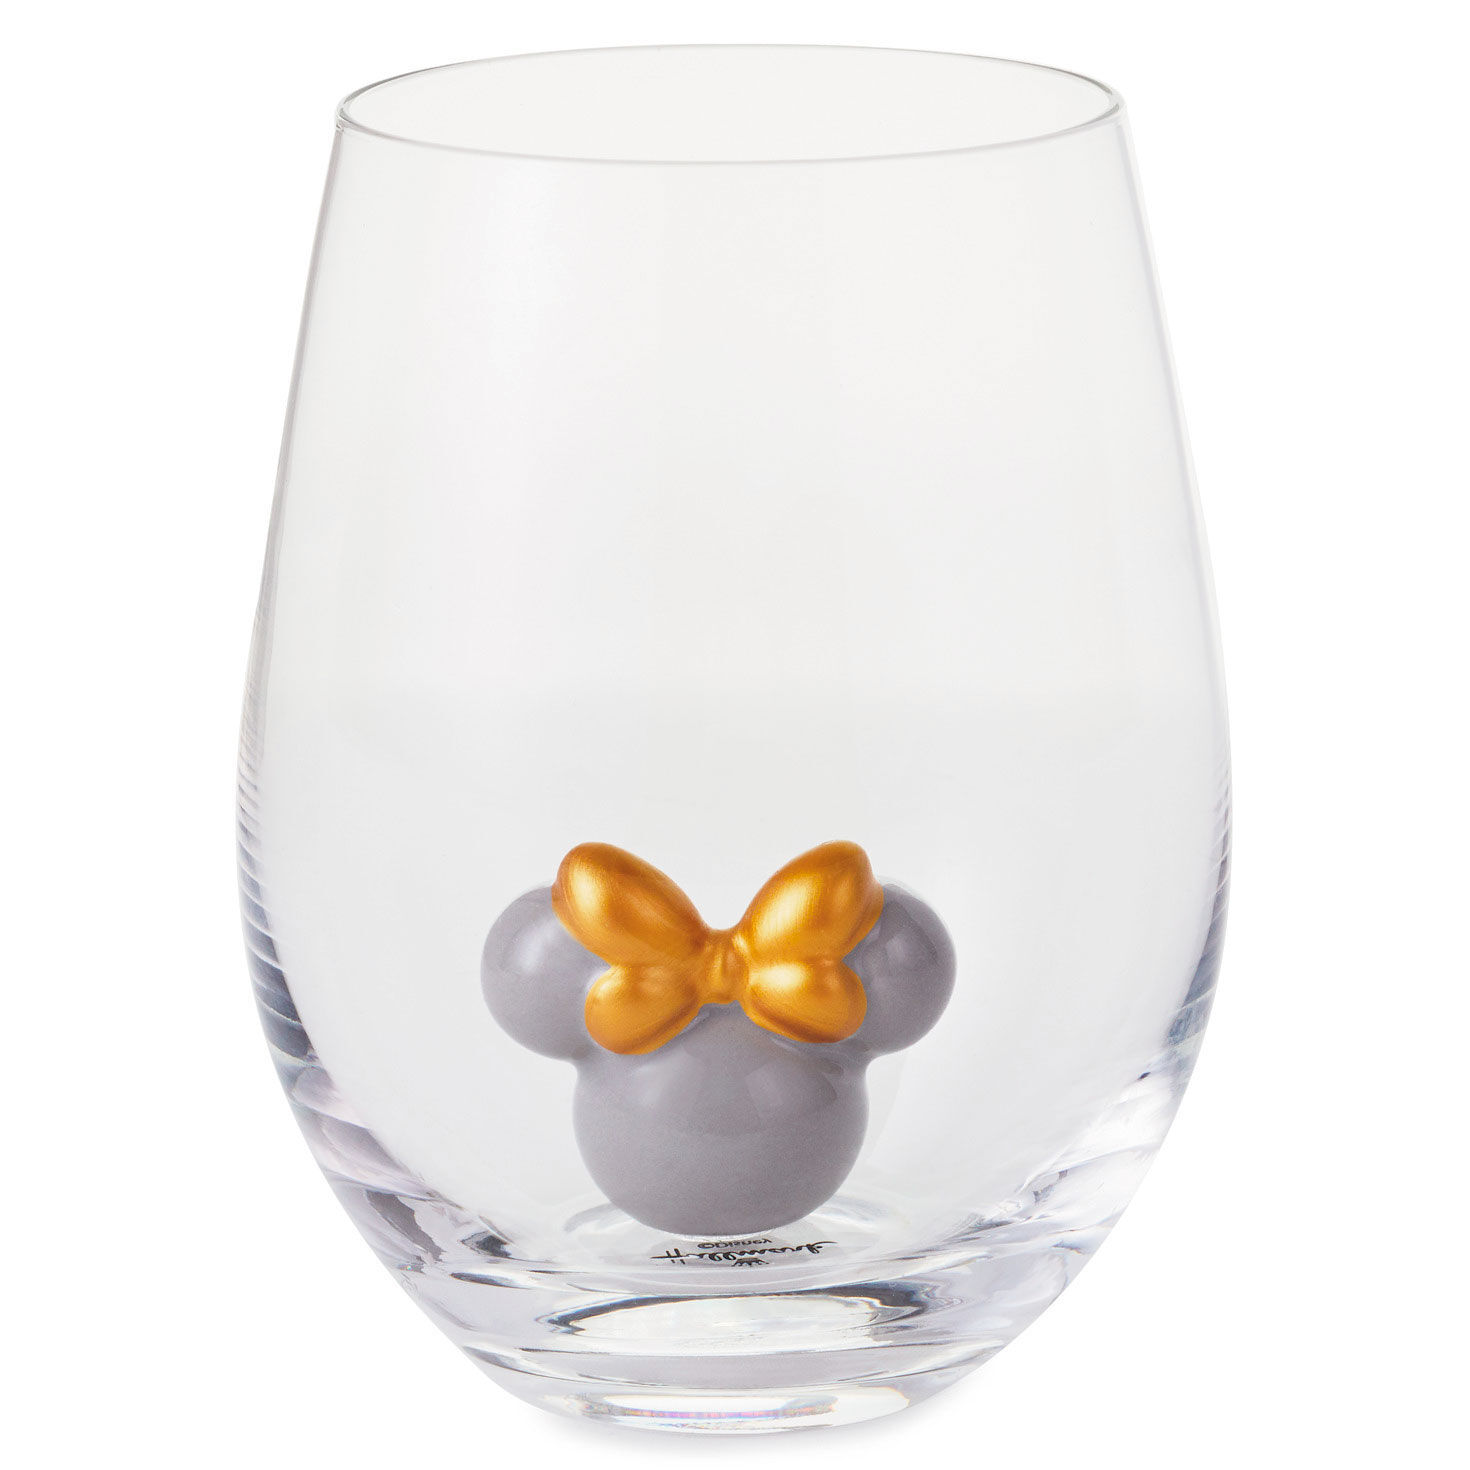 https://www.hallmark.com/dw/image/v2/AALB_PRD/on/demandware.static/-/Sites-hallmark-master/default/dw48331573/images/finished-goods/products/1DYG2047/Disney-Minnie-Mouse-Ears-Silhouette-Stemless-Glass_1DYG2047_01.jpg?sfrm=jpg